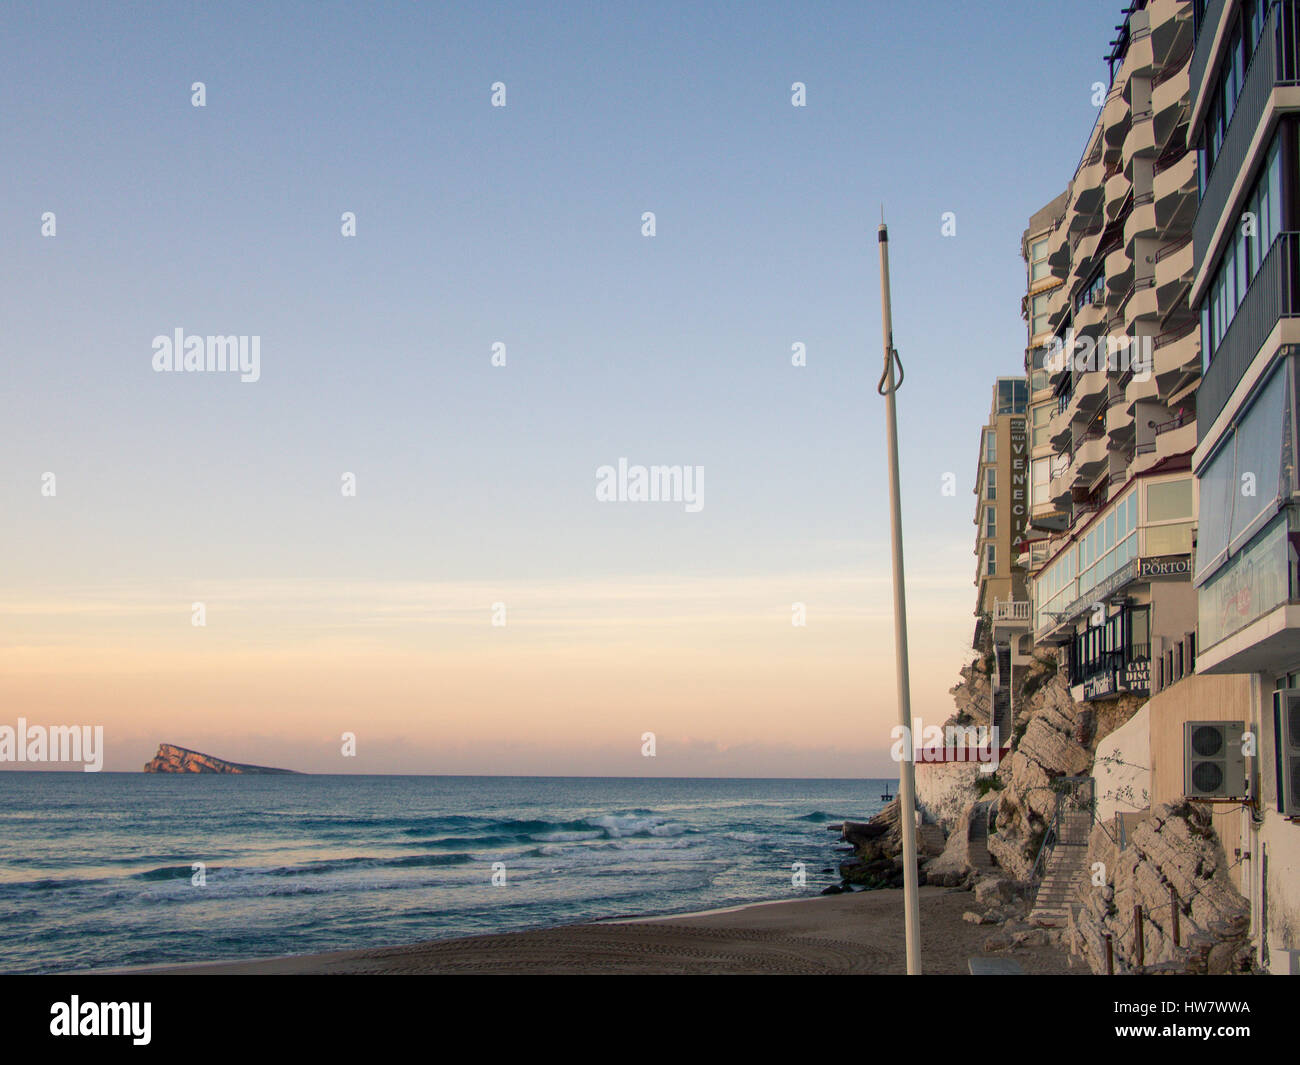 The facade of hotels, in Benidorm's Old Town, look out towards the iconic Benidorm Island. Stock Photo